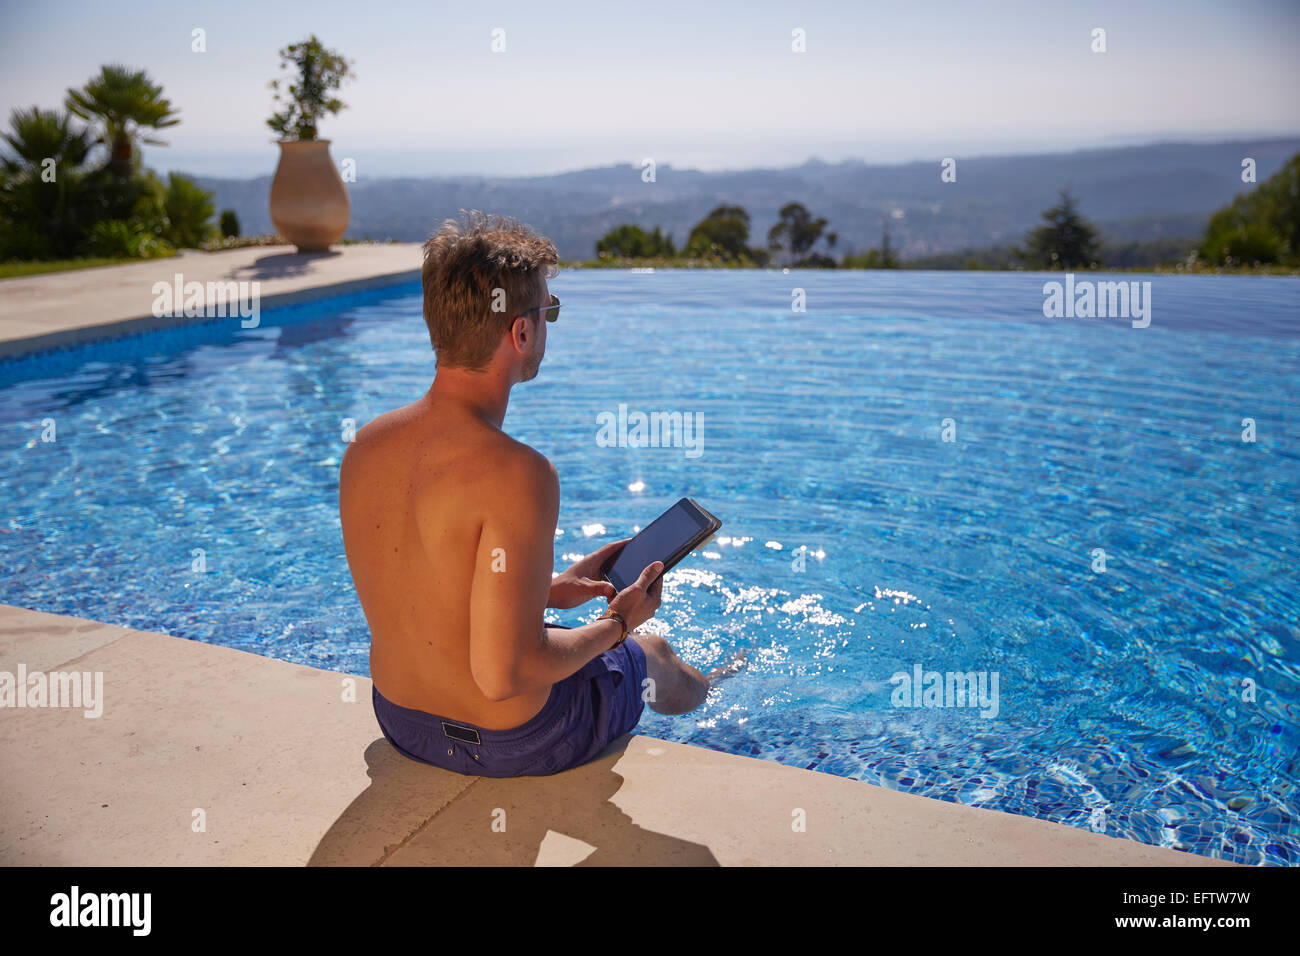 Young man by the pool on holiday with a tablet computer Stock Photo